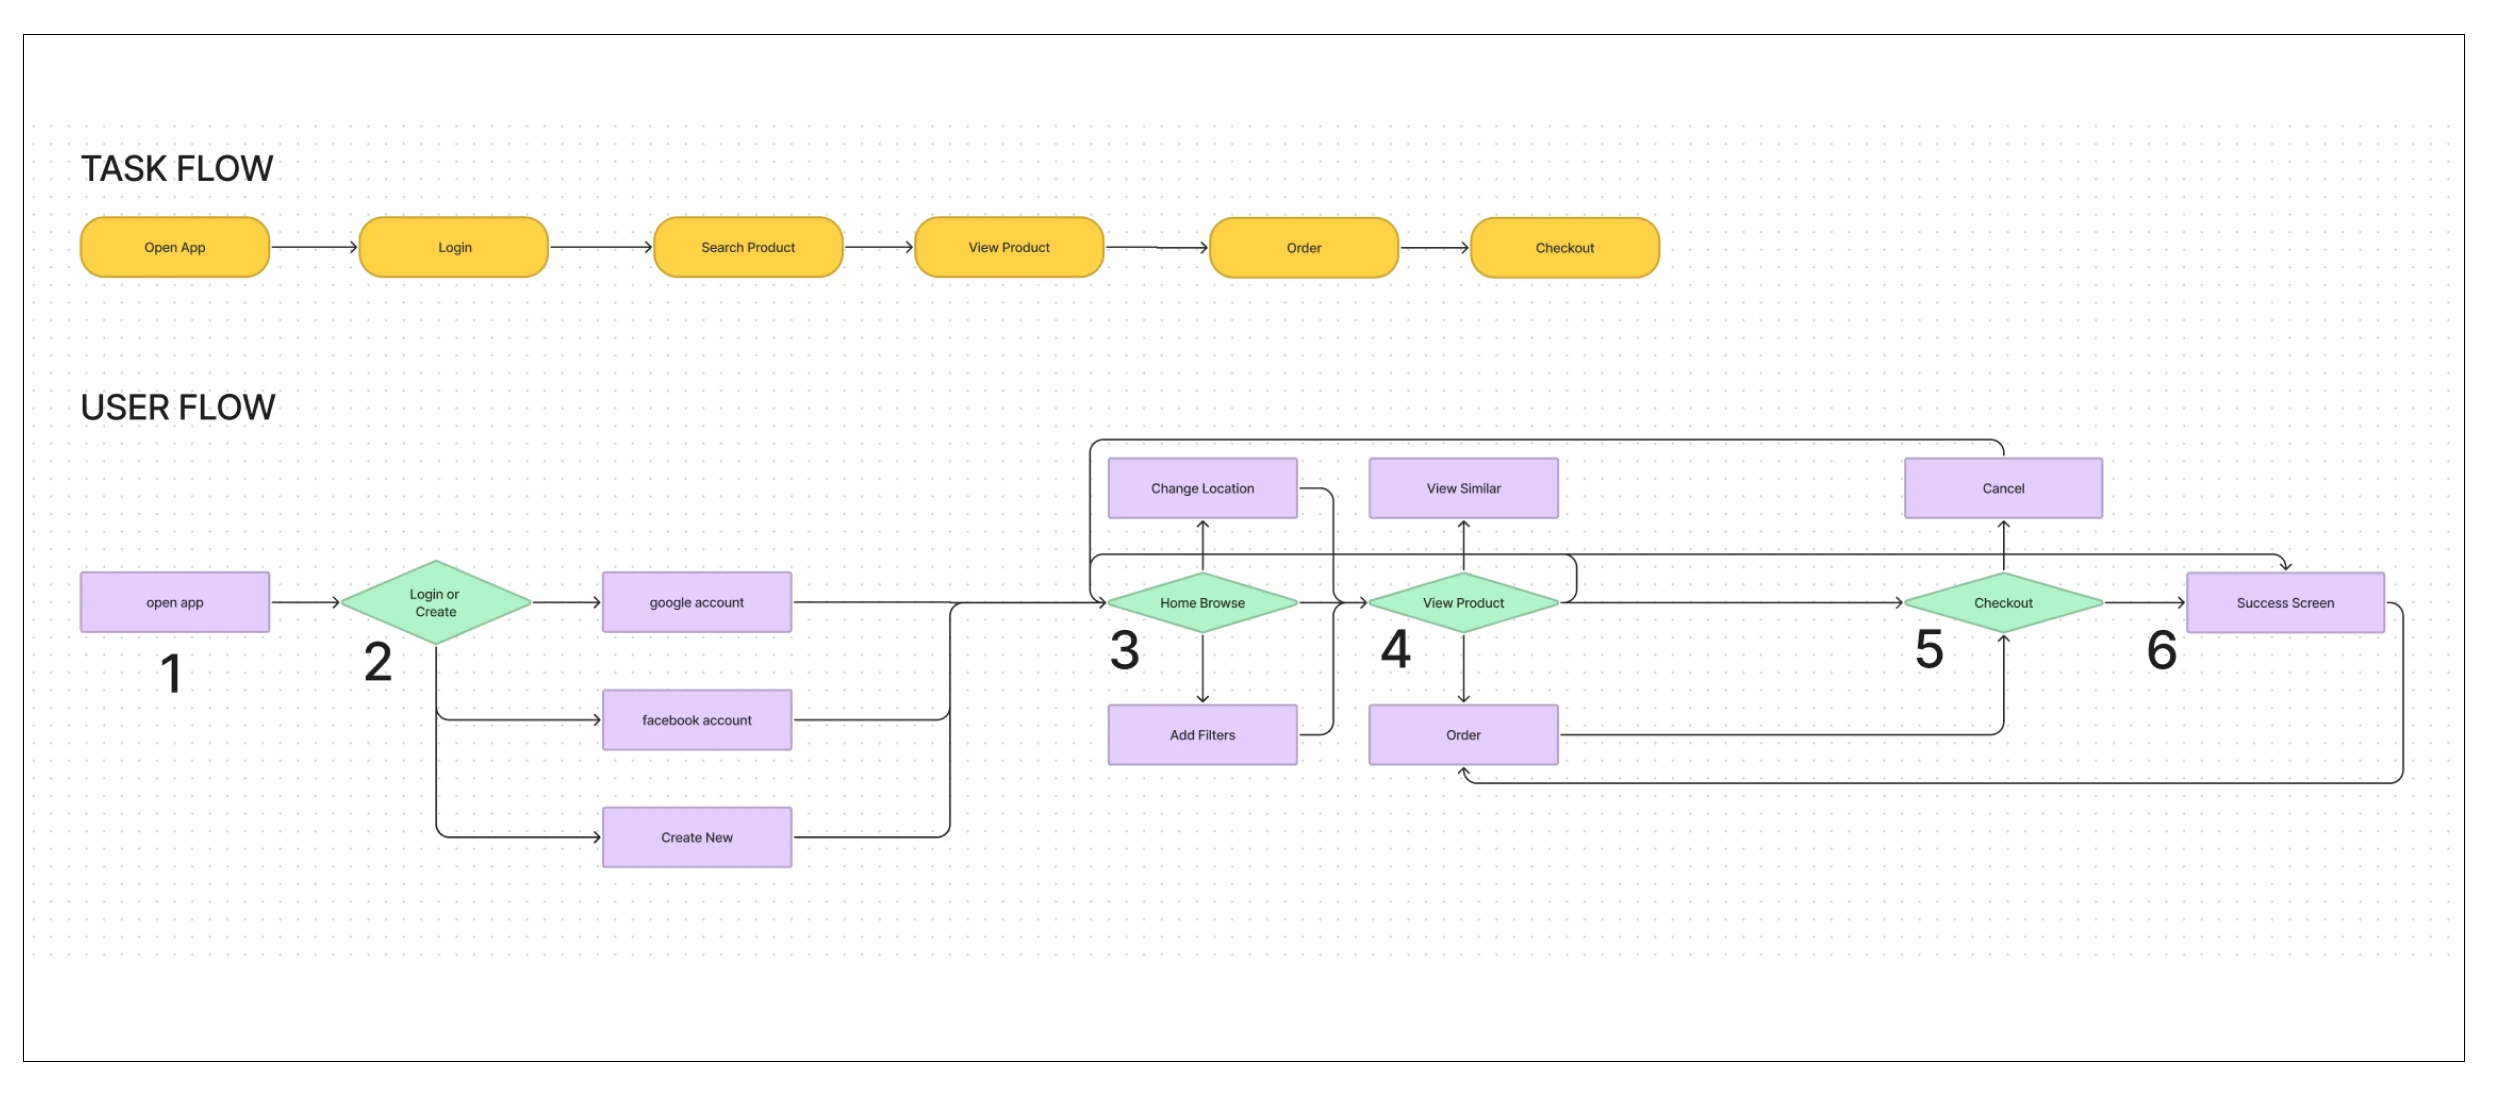 Task flow and user flow image